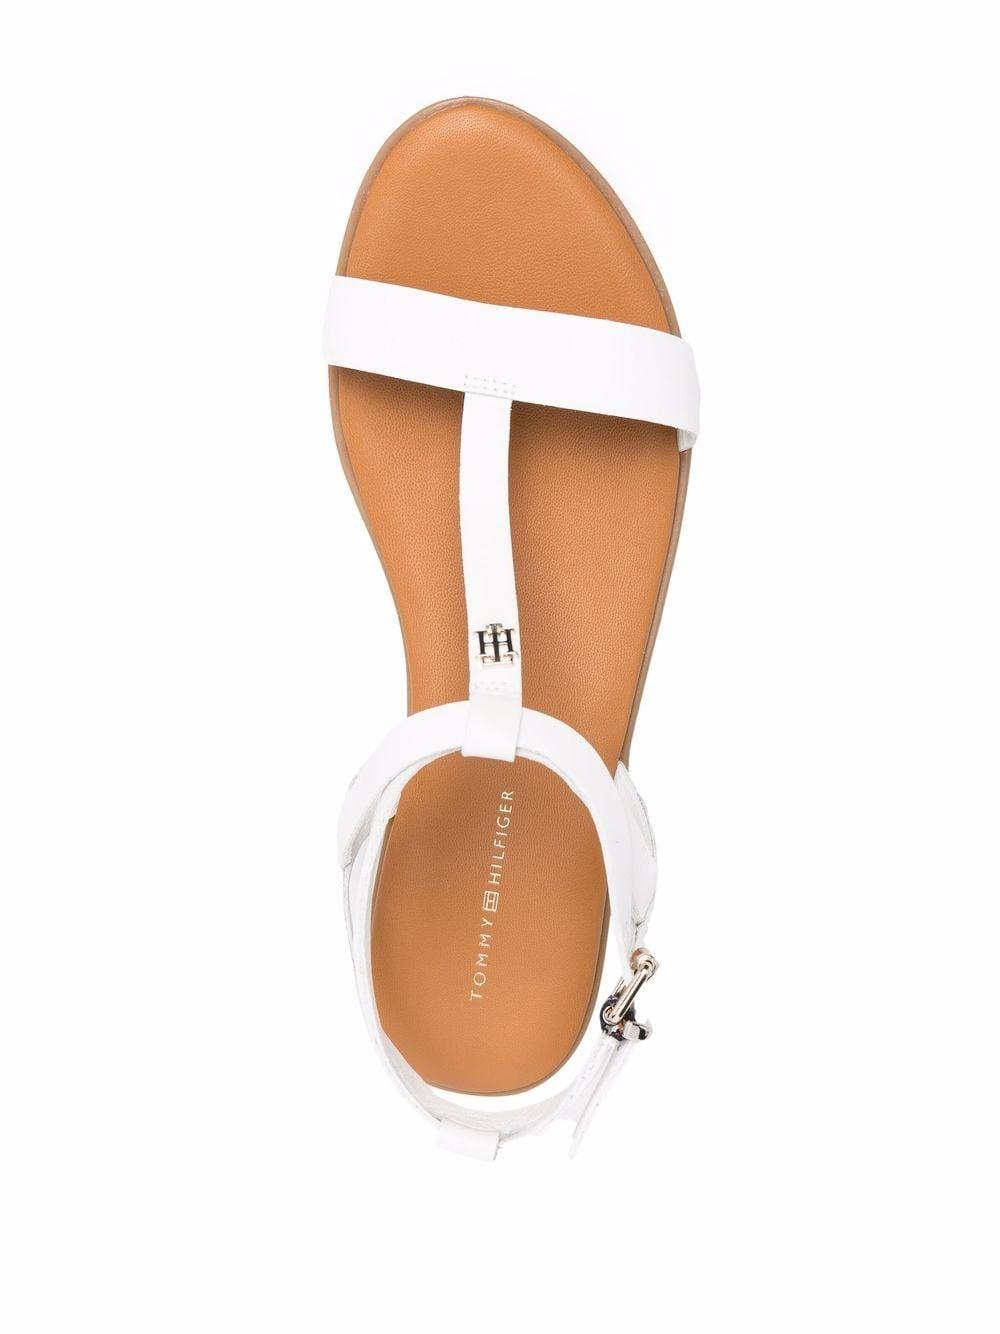 Tommy Hilfiger Leather Open-toe Flat Sandals in White - Lyst